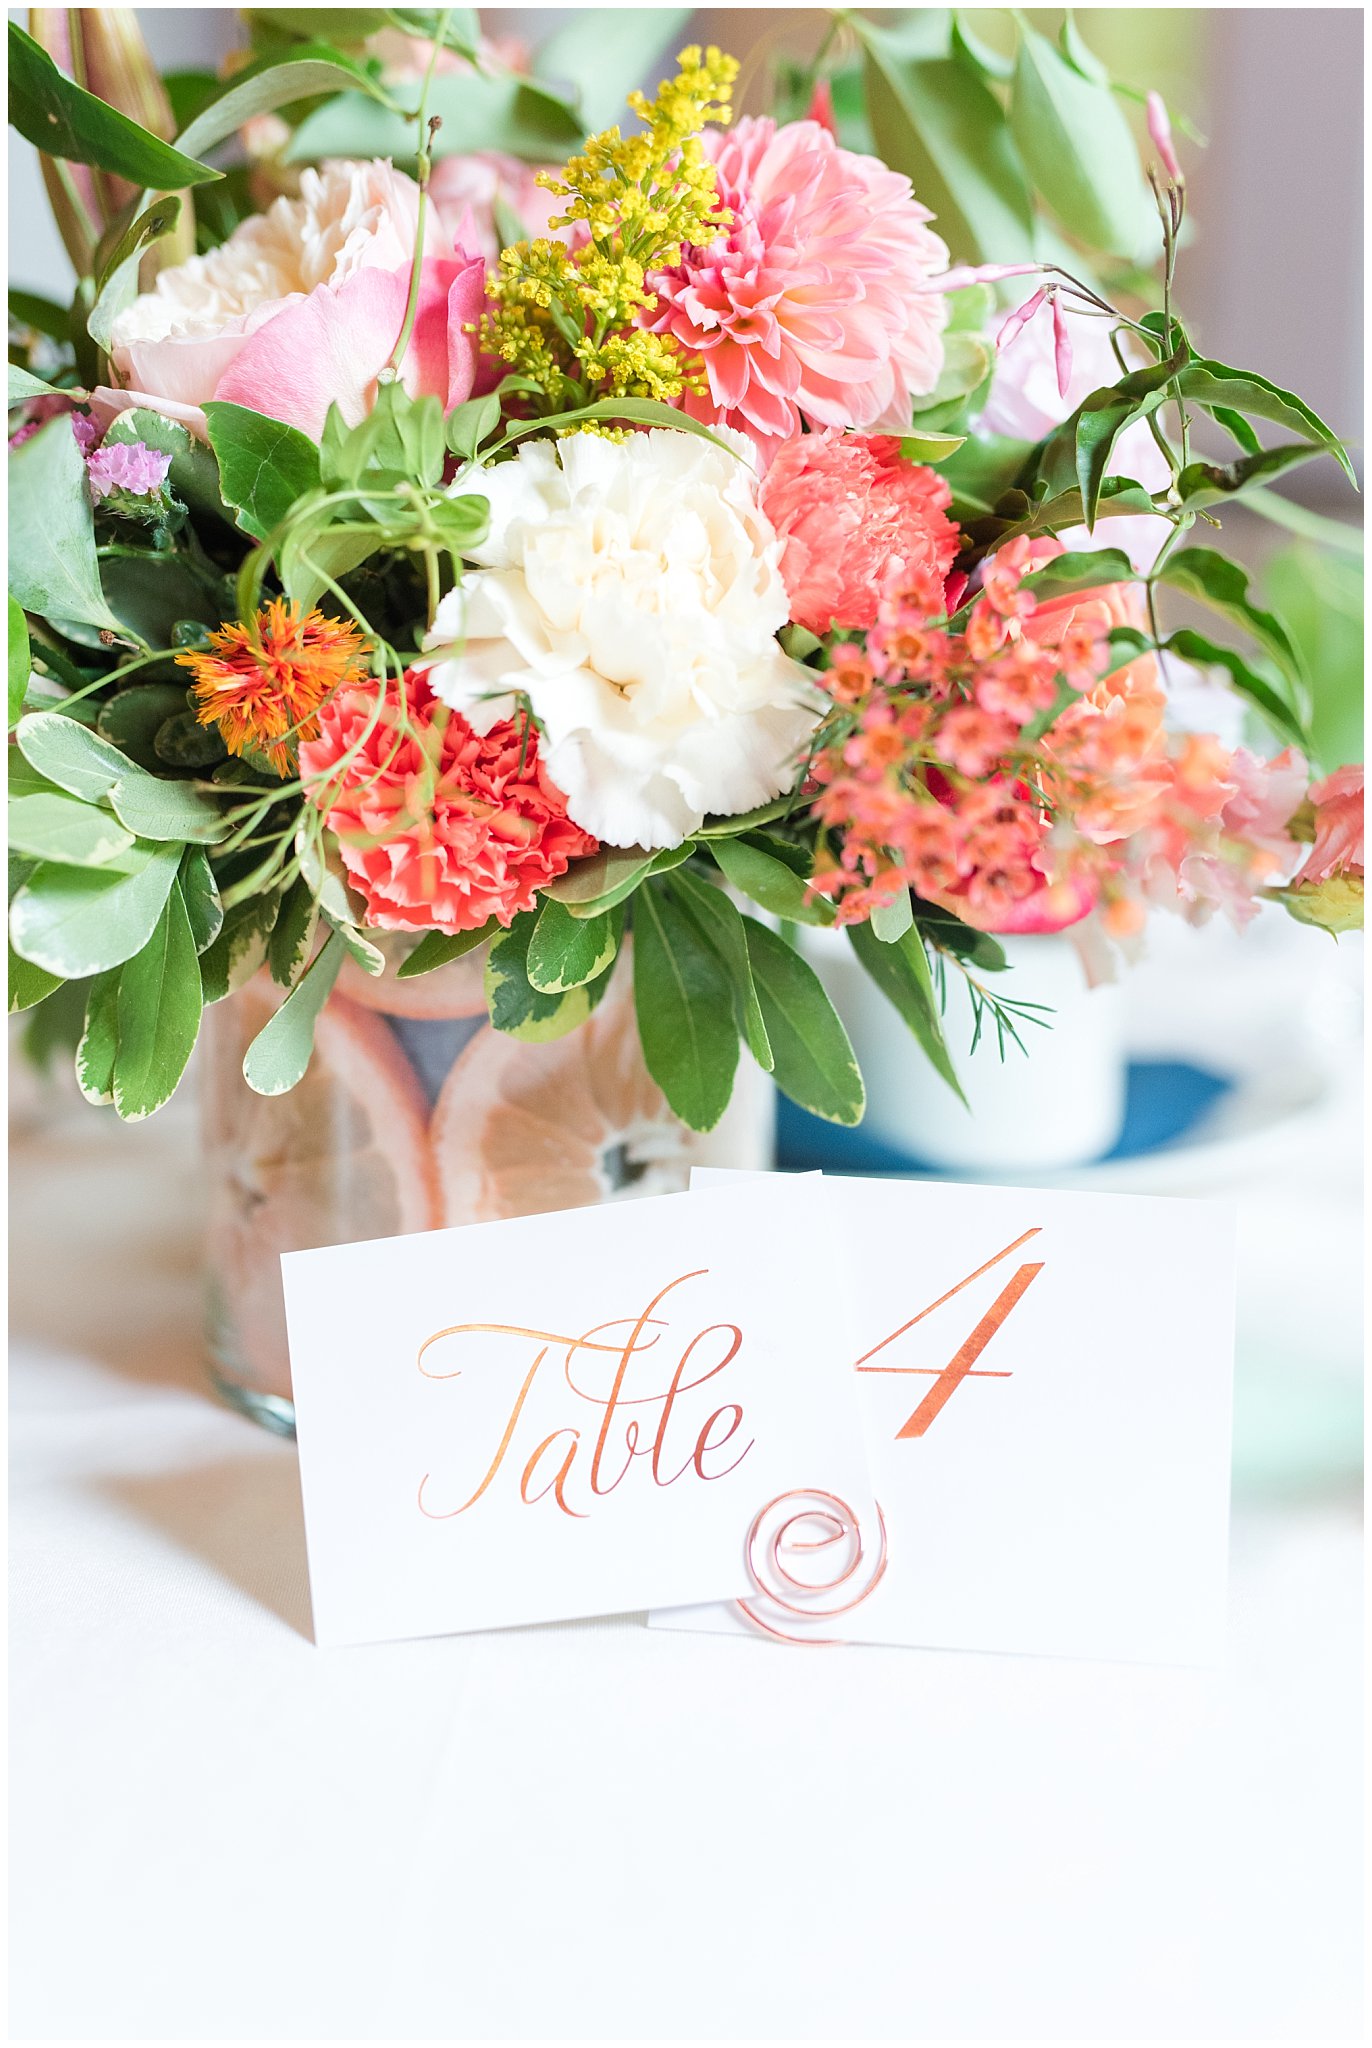 Reception setup with orange uplighting | butterfly wedding with sunset colors | Park City Wedding at the Hyatt Centric | Jessie and Dallin Photography